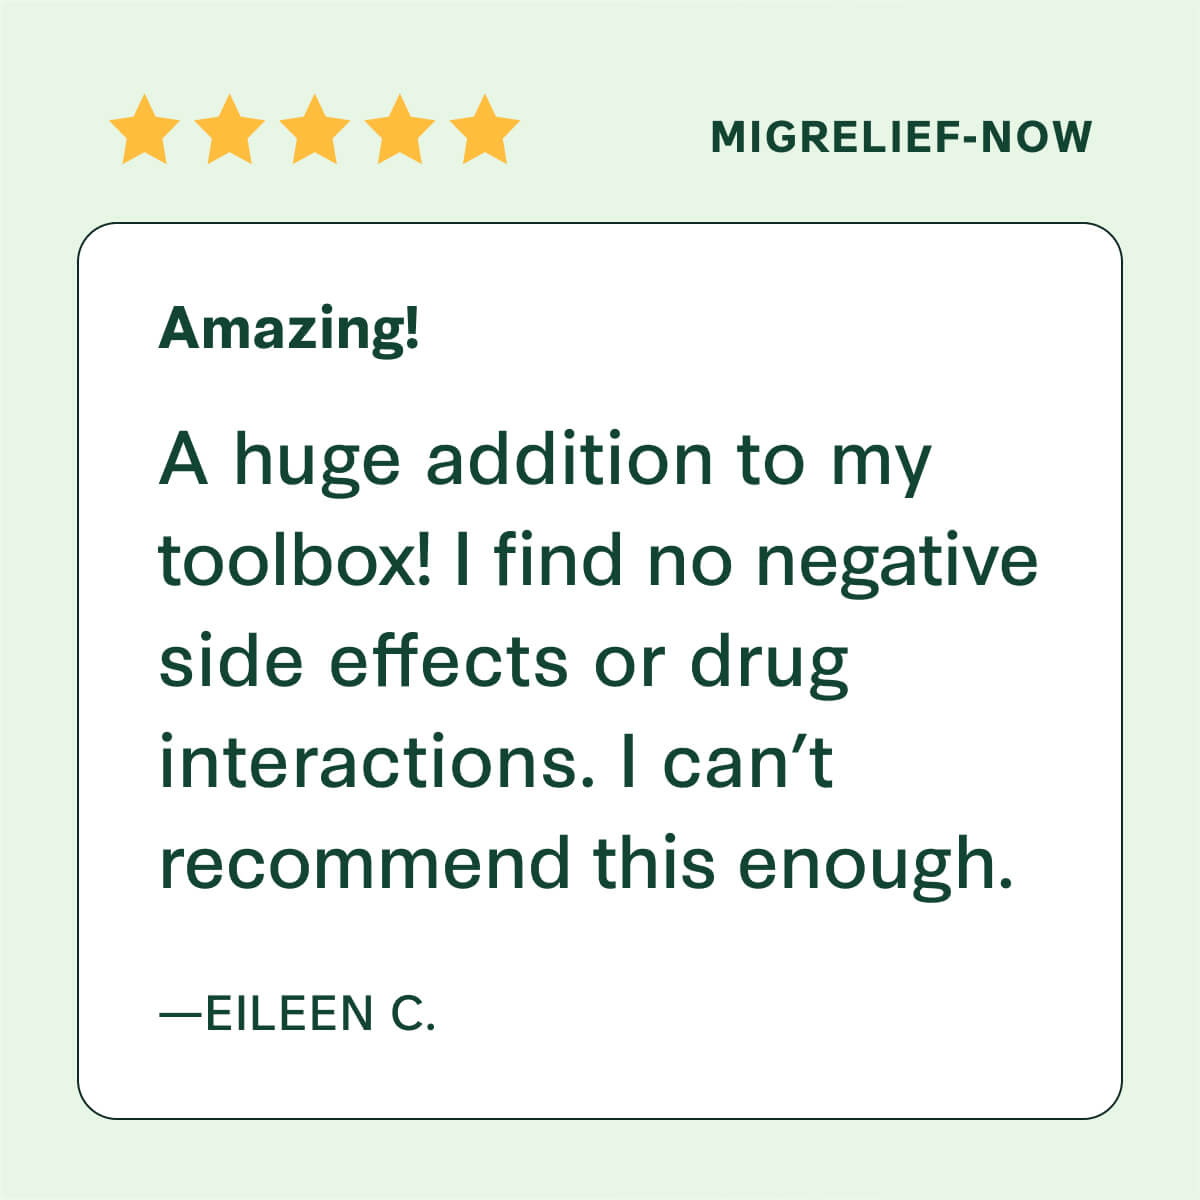 Customer review of MigreLief-NOW.